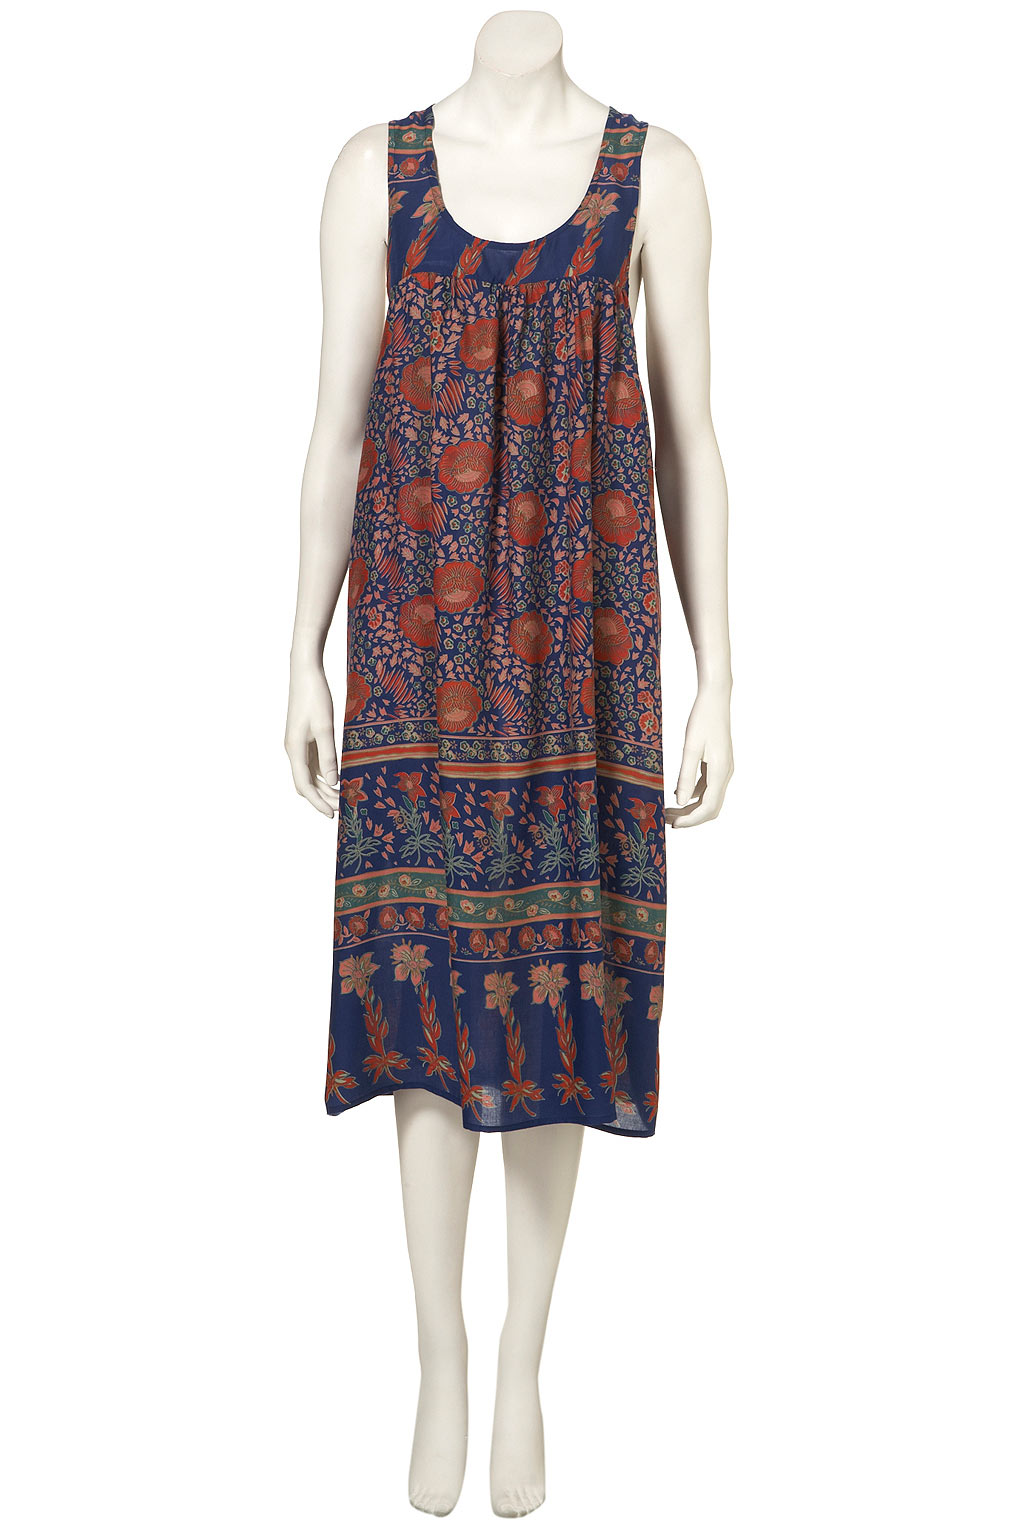 Lyst - Topshop Tile Print Dress By Band Of Gypsies in White